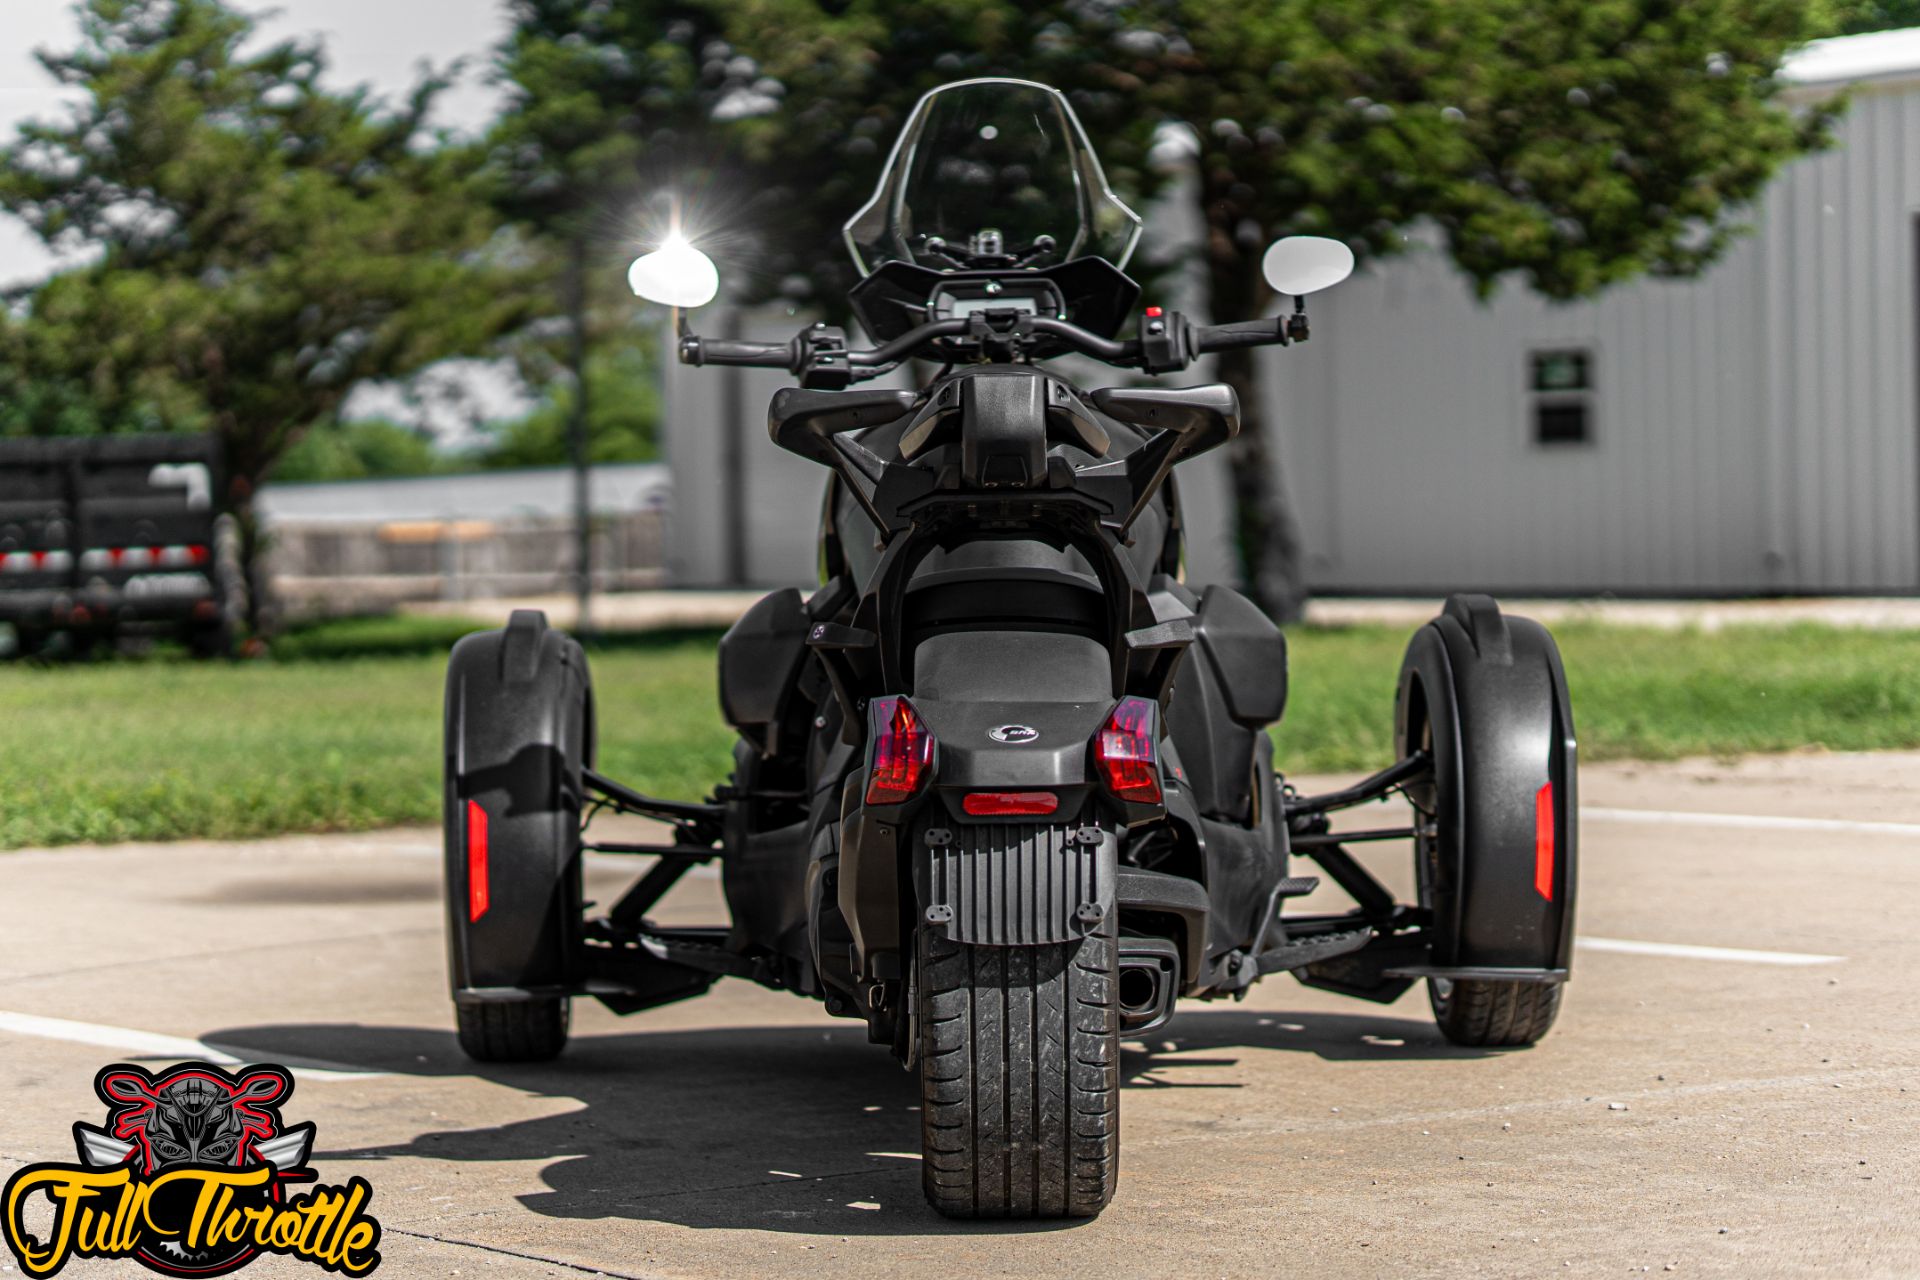 2019 Can-Am RYKER 900 ACE in Lancaster, Texas - Photo 4